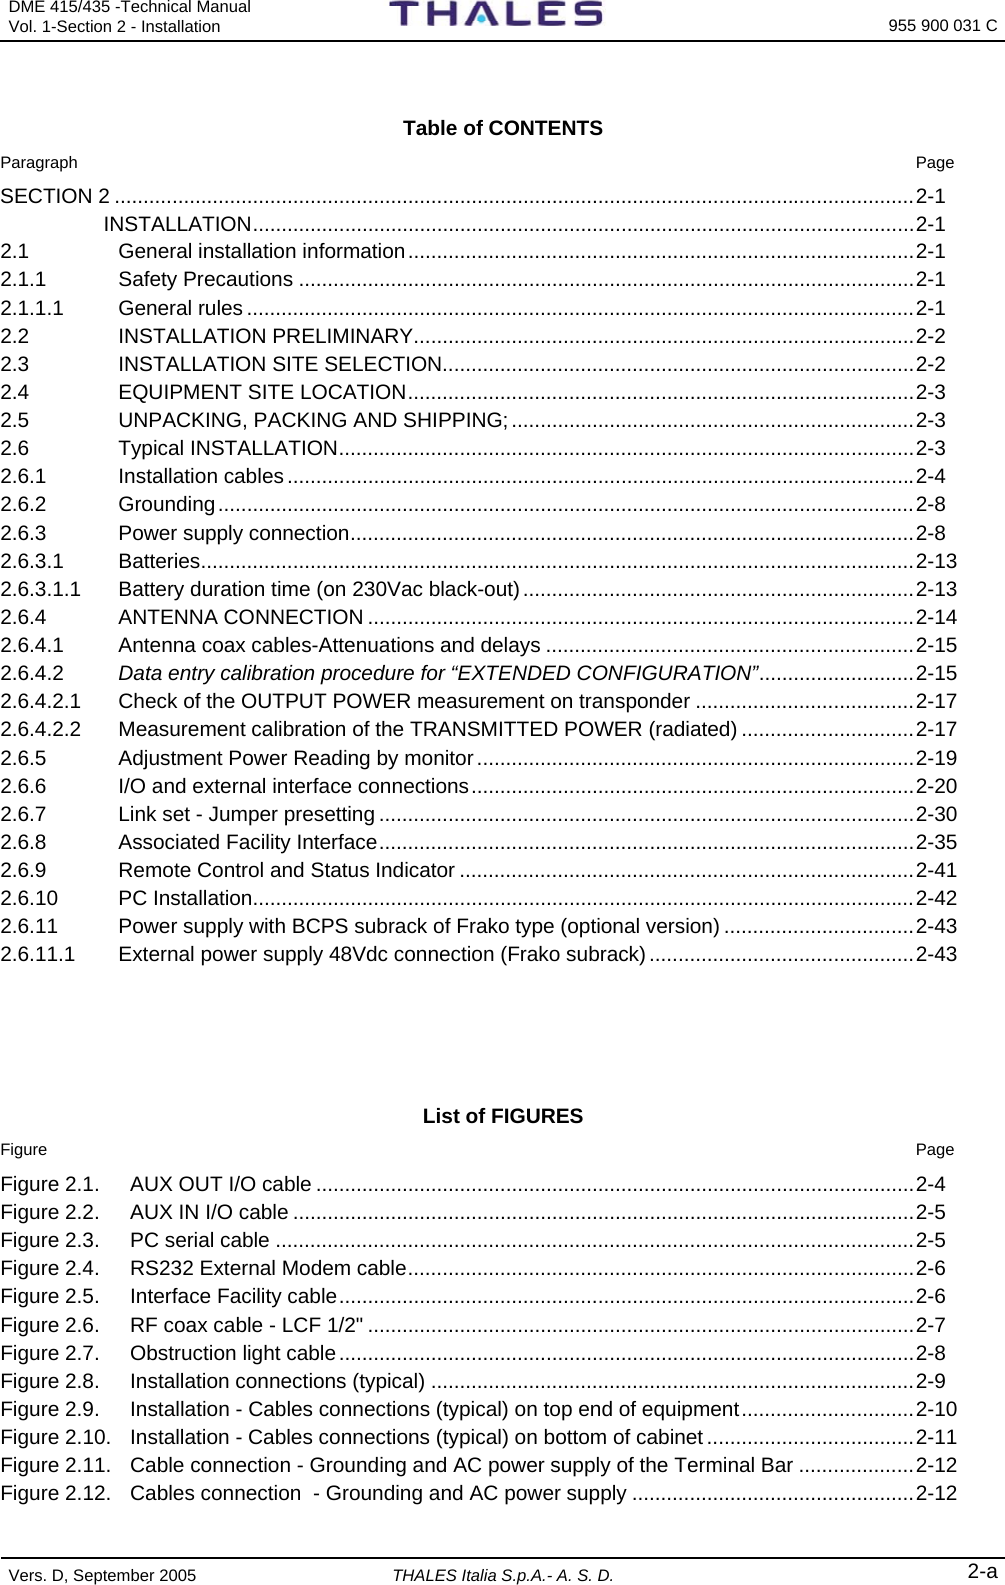 DME 415/435 -Technical Manual  Vol. 1-Section 2 - Installation  955 900 031 C Vers. D, September 2005 THALES Italia S.p.A.- A. S. D. 2-a  Table of CONTENTS  Paragraph  Page SECTION 2 ...........................................................................................................................................2-1  INSTALLATION...................................................................................................................2-1 2.1 General installation information........................................................................................2-1 2.1.1 Safety Precautions ...........................................................................................................2-1 2.1.1.1 General rules ....................................................................................................................2-1 2.2 INSTALLATION PRELIMINARY.......................................................................................2-2 2.3 INSTALLATION SITE SELECTION..................................................................................2-2 2.4 EQUIPMENT SITE LOCATION........................................................................................2-3 2.5 UNPACKING, PACKING AND SHIPPING;......................................................................2-3 2.6 Typical INSTALLATION....................................................................................................2-3 2.6.1 Installation cables .............................................................................................................2-4 2.6.2 Grounding.........................................................................................................................2-8 2.6.3 Power supply connection..................................................................................................2-8 2.6.3.1 Batteries............................................................................................................................2-13 2.6.3.1.1 Battery duration time (on 230Vac black-out)....................................................................2-13 2.6.4 ANTENNA CONNECTION ...............................................................................................2-14 2.6.4.1 Antenna coax cables-Attenuations and delays ................................................................2-15 2.6.4.2 Data entry calibration procedure for “EXTENDED CONFIGURATION”...........................2-15 2.6.4.2.1 Check of the OUTPUT POWER measurement on transponder ......................................2-17 2.6.4.2.2 Measurement calibration of the TRANSMITTED POWER (radiated) ..............................2-17 2.6.5 Adjustment Power Reading by monitor............................................................................2-19 2.6.6 I/O and external interface connections.............................................................................2-20 2.6.7 Link set - Jumper presetting .............................................................................................2-30 2.6.8 Associated Facility Interface.............................................................................................2-35 2.6.9 Remote Control and Status Indicator ...............................................................................2-41 2.6.10 PC Installation...................................................................................................................2-42 2.6.11 Power supply with BCPS subrack of Frako type (optional version) .................................2-43 2.6.11.1 External power supply 48Vdc connection (Frako subrack) ..............................................2-43     List of FIGURES Figure  Page Figure 2.1.  AUX OUT I/O cable ........................................................................................................2-4 Figure 2.2.  AUX IN I/O cable ............................................................................................................2-5 Figure 2.3.  PC serial cable ...............................................................................................................2-5 Figure 2.4.  RS232 External Modem cable........................................................................................2-6 Figure 2.5.  Interface Facility cable....................................................................................................2-6 Figure 2.6.  RF coax cable - LCF 1/2&quot; ...............................................................................................2-7 Figure 2.7.  Obstruction light cable....................................................................................................2-8 Figure 2.8.  Installation connections (typical) ....................................................................................2-9 Figure 2.9.  Installation - Cables connections (typical) on top end of equipment..............................2-10 Figure 2.10.  Installation - Cables connections (typical) on bottom of cabinet ....................................2-11 Figure 2.11.  Cable connection - Grounding and AC power supply of the Terminal Bar ....................2-12 Figure 2.12.  Cables connection  - Grounding and AC power supply .................................................2-12 